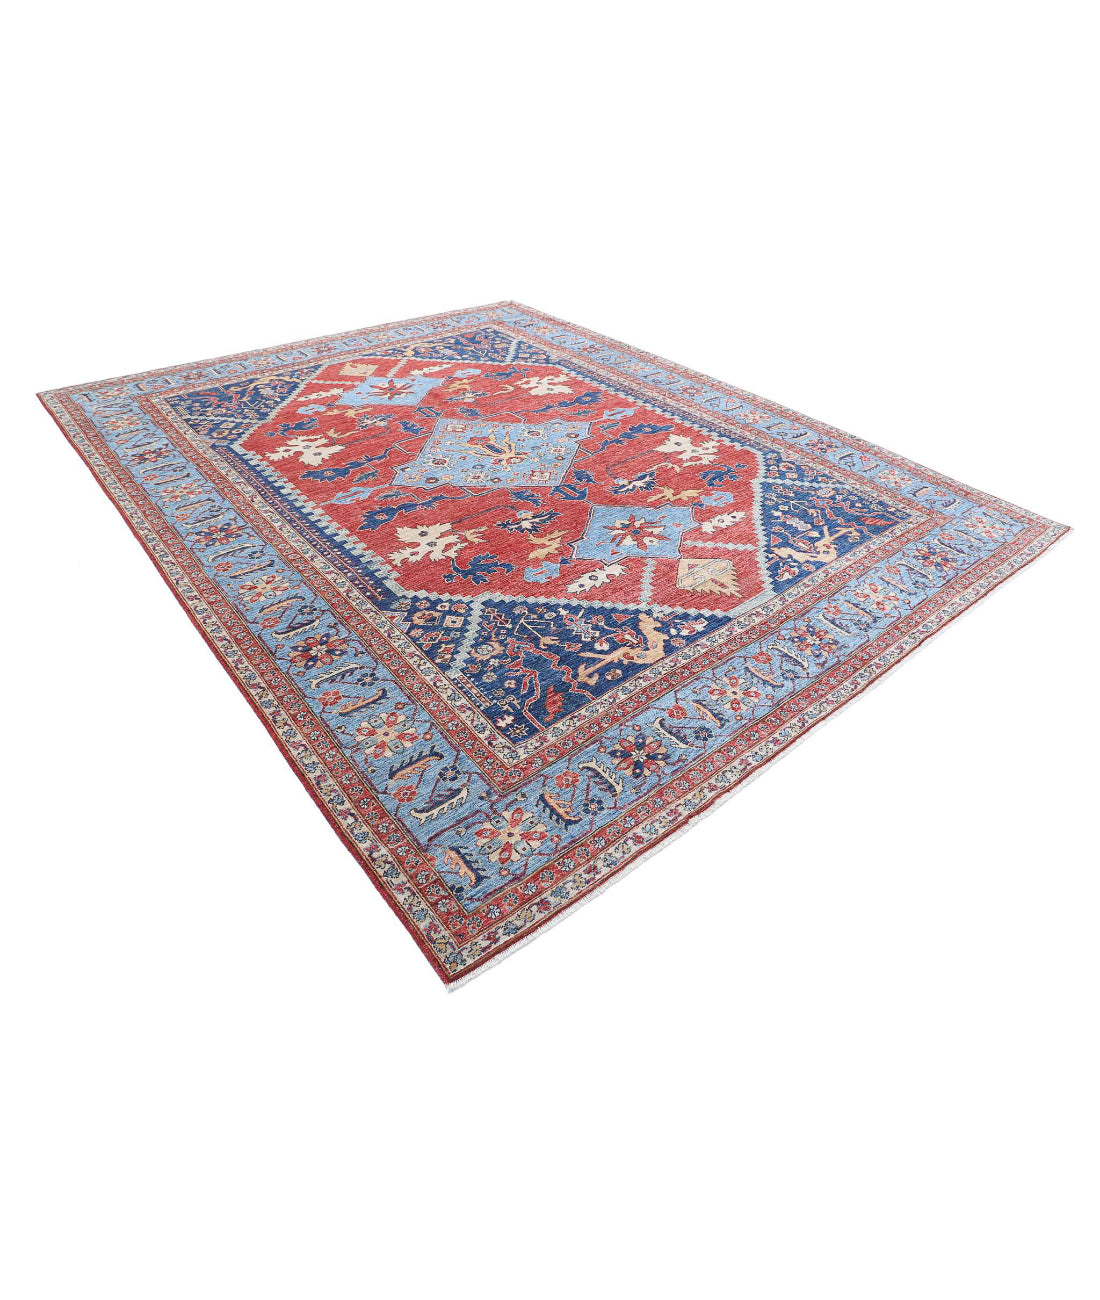 Heriz 9'5'' X 11'10'' Hand-Knotted Wool Rug 9'5'' x 11'10'' (283 X 355) / Red / Blue